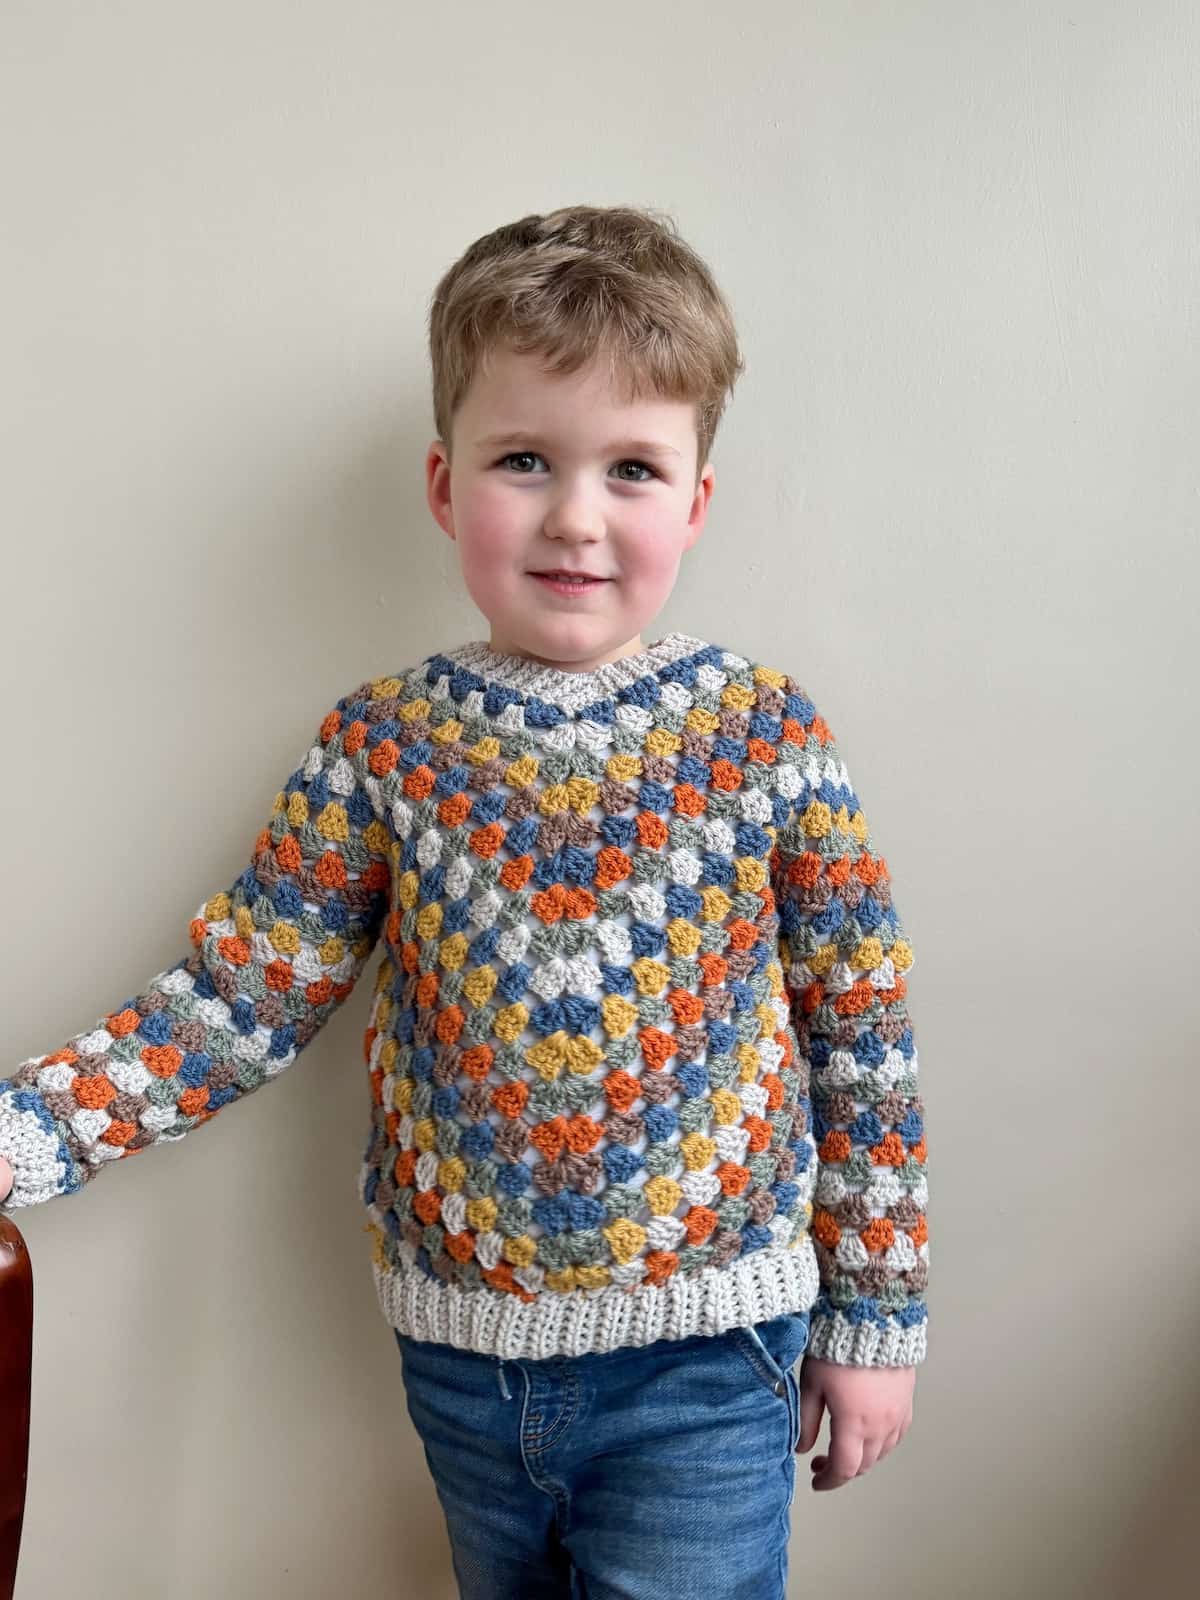 A child in a crocheted sweater.